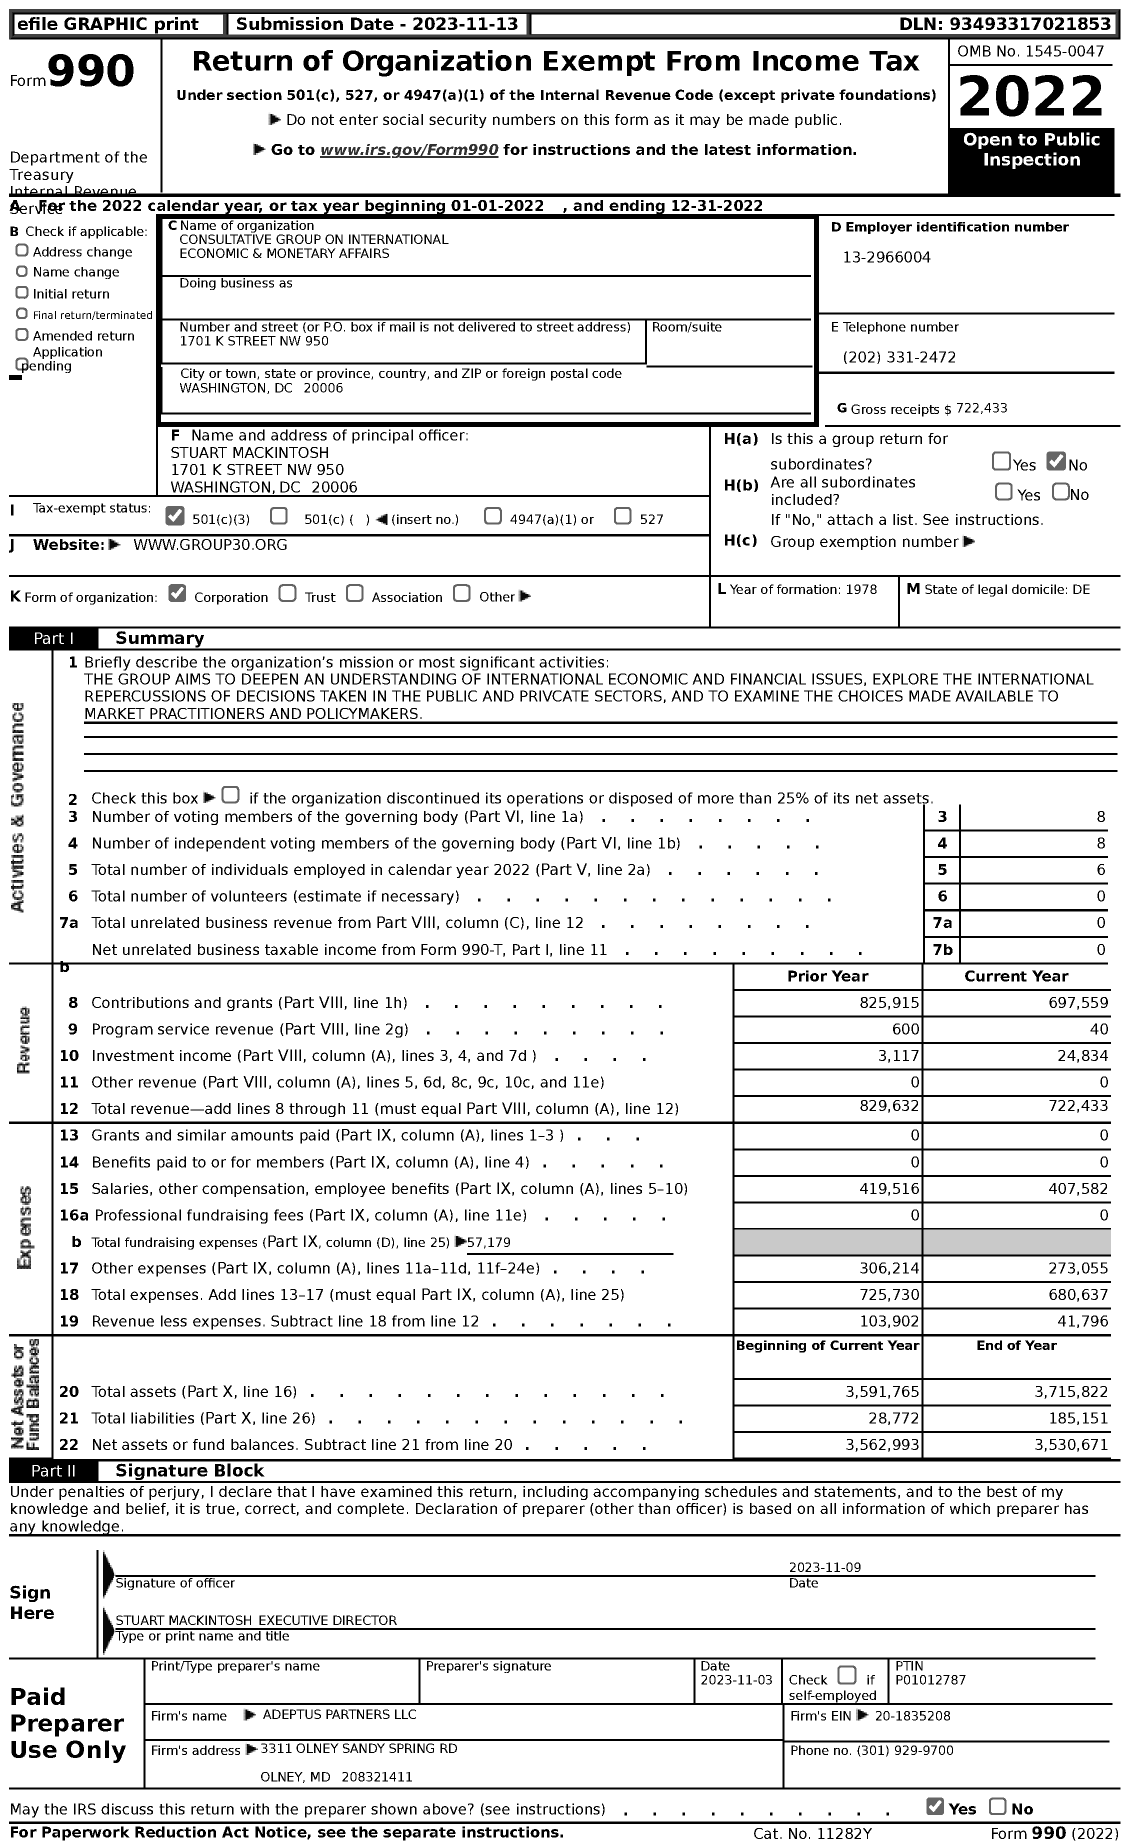 Image of first page of 2022 Form 990 for Consultative Group on International Economic and Monetary Affairs